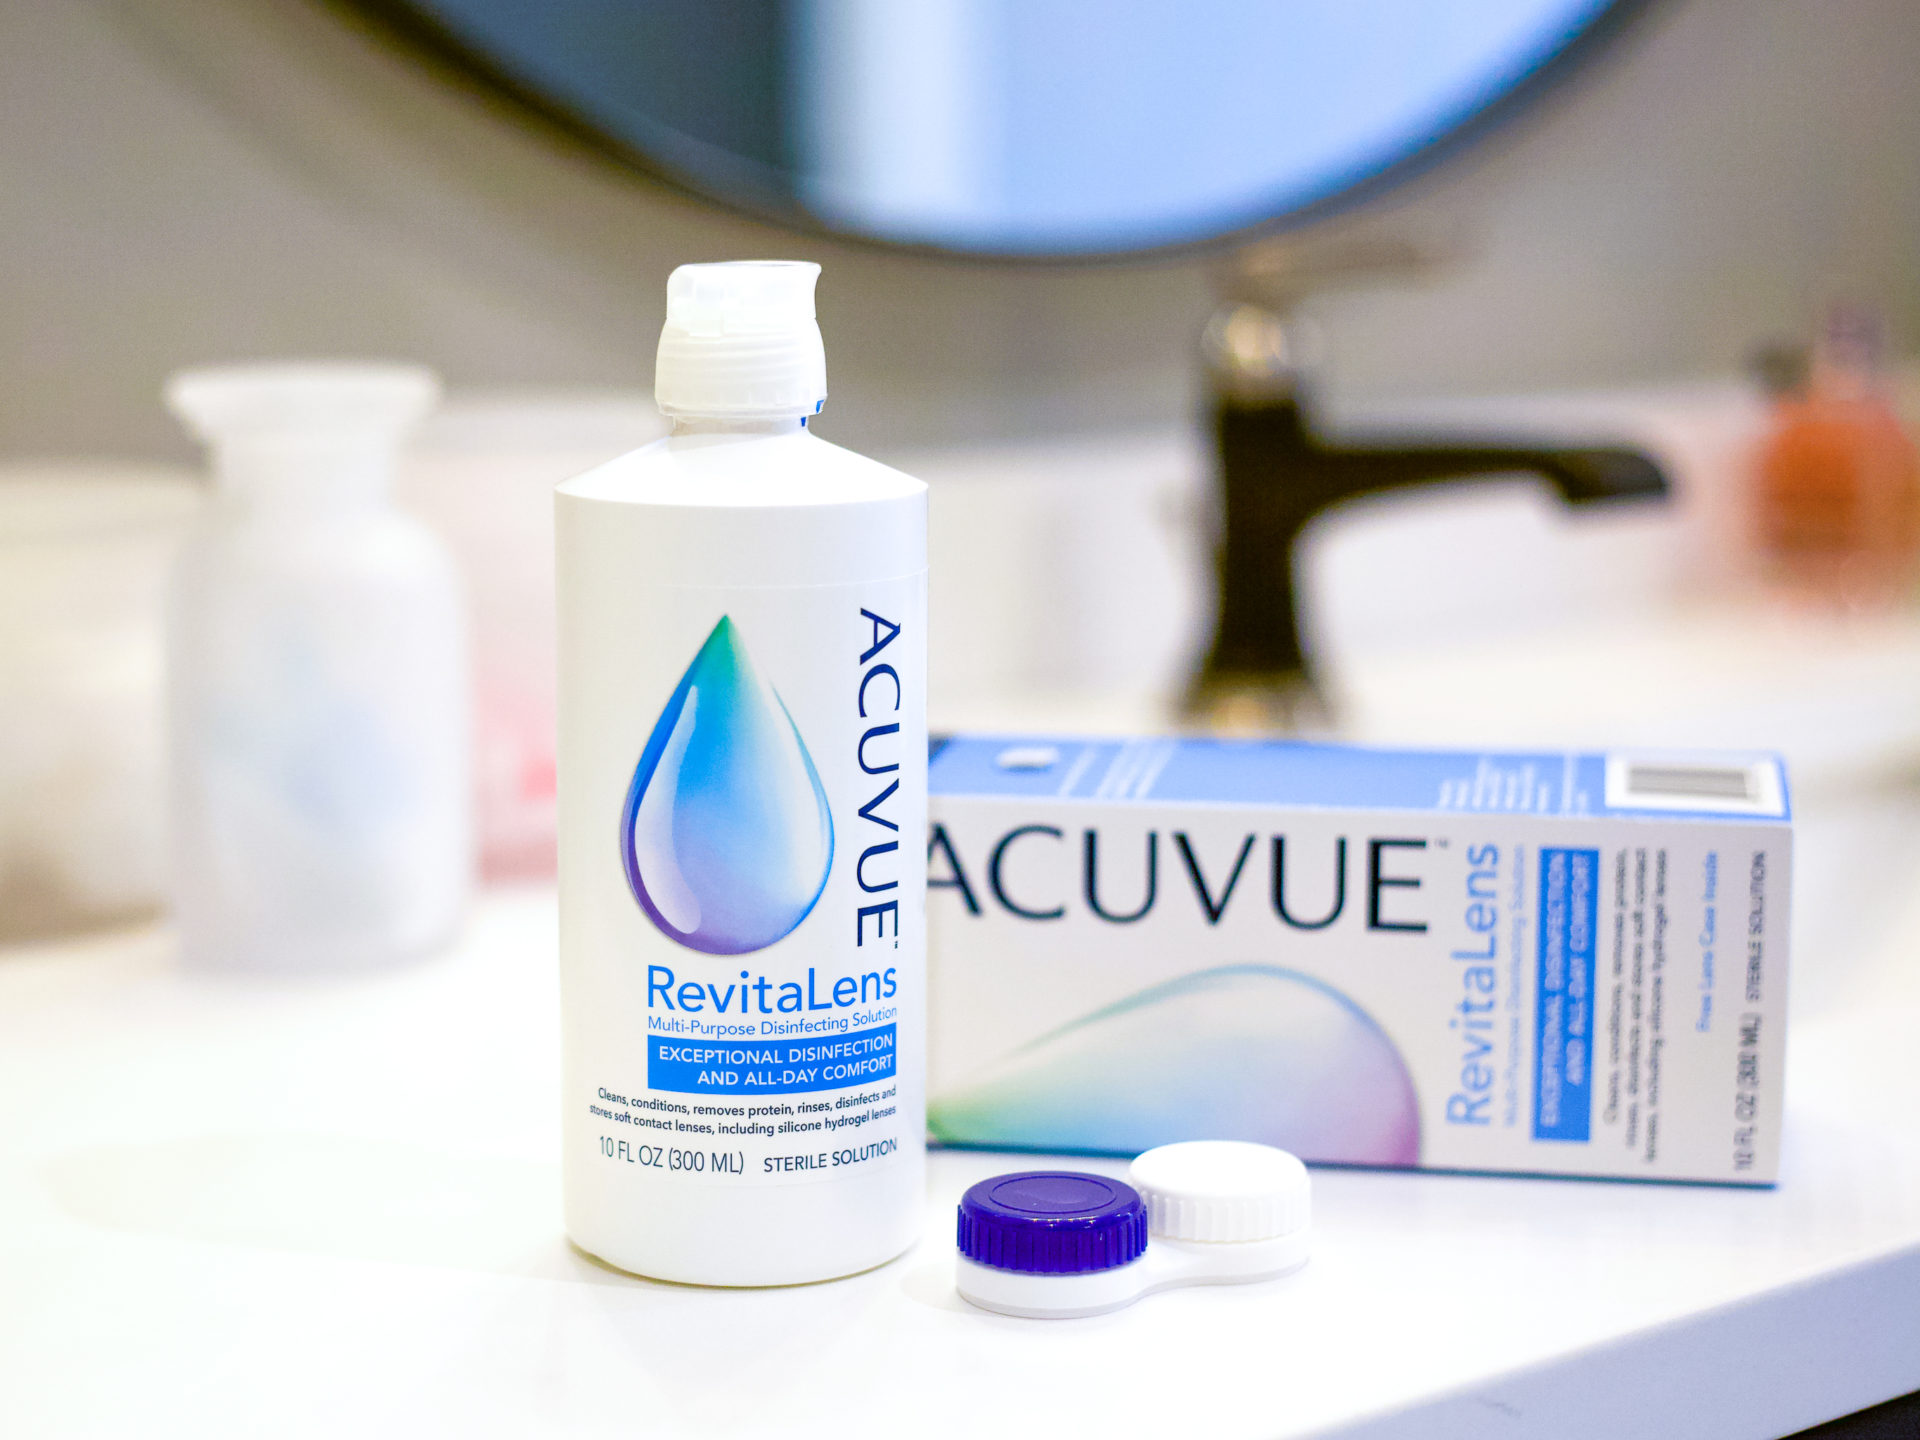 Acuvue Contact Lens Solution Just $2.99 At Kroger (Regular Price $9.99)